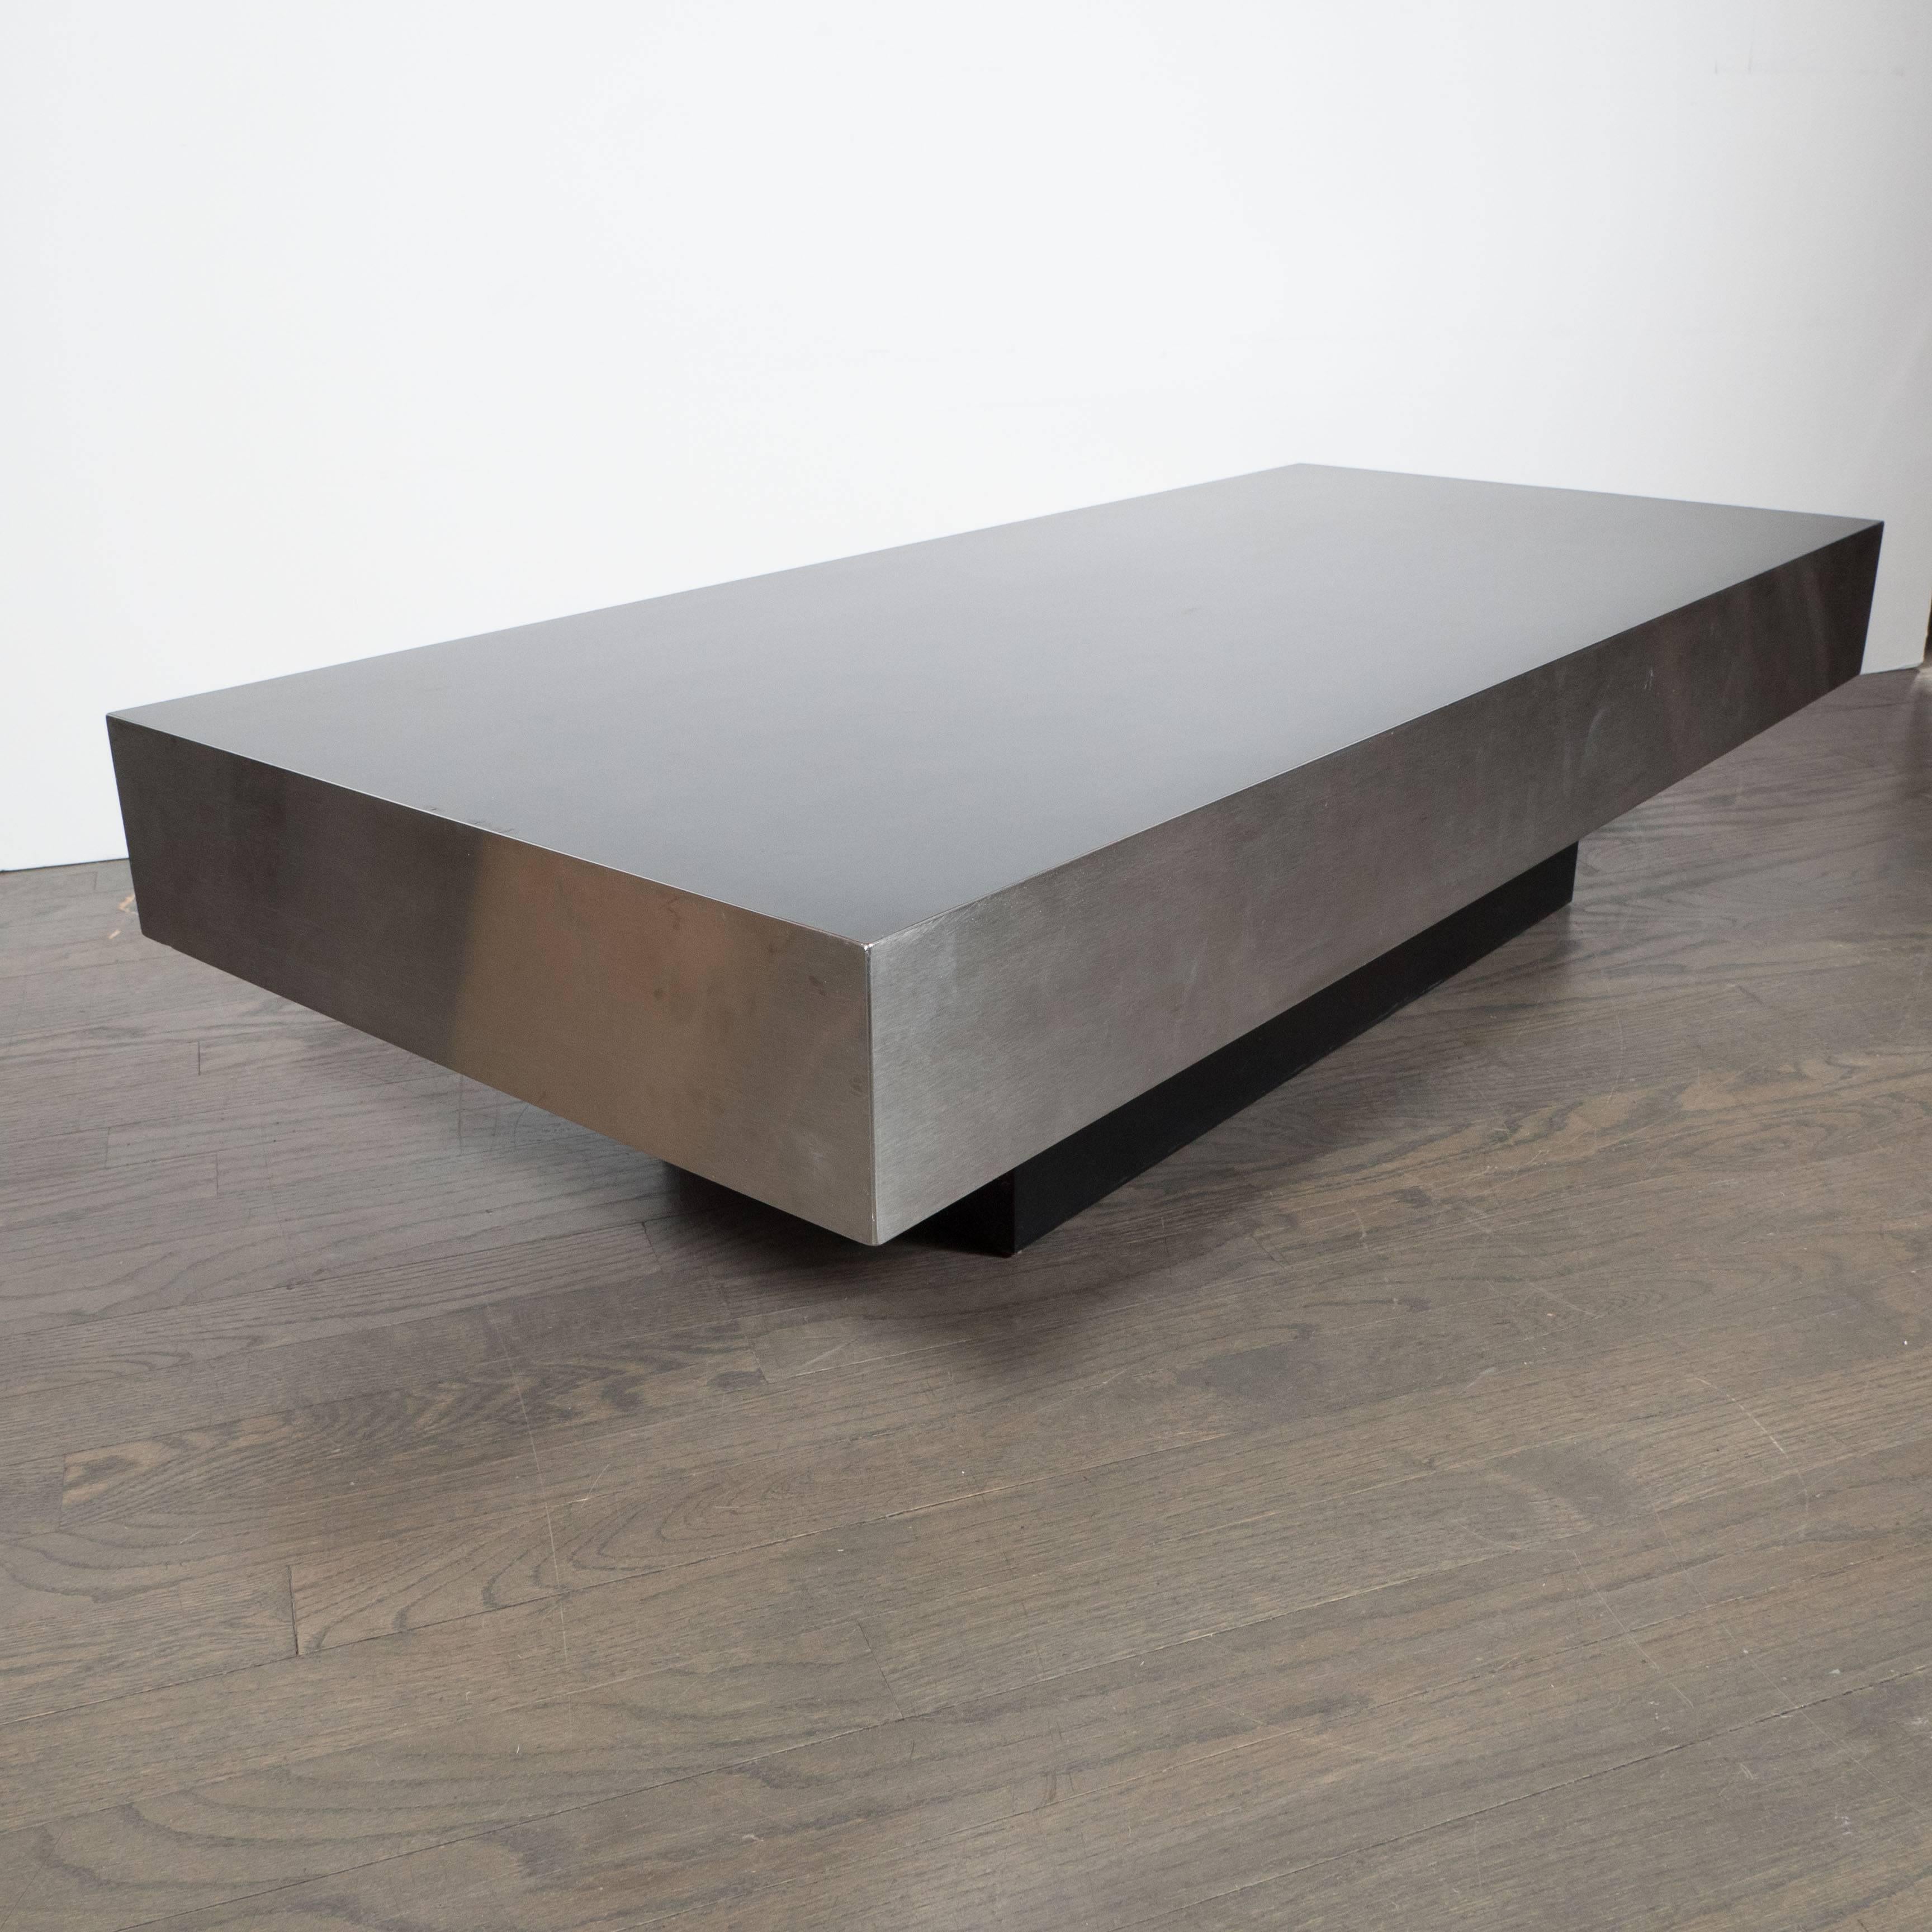 Late 20th Century Mid-Century Modernist Low Cocktail Table in Brushed Aluminium, Style of Breuton